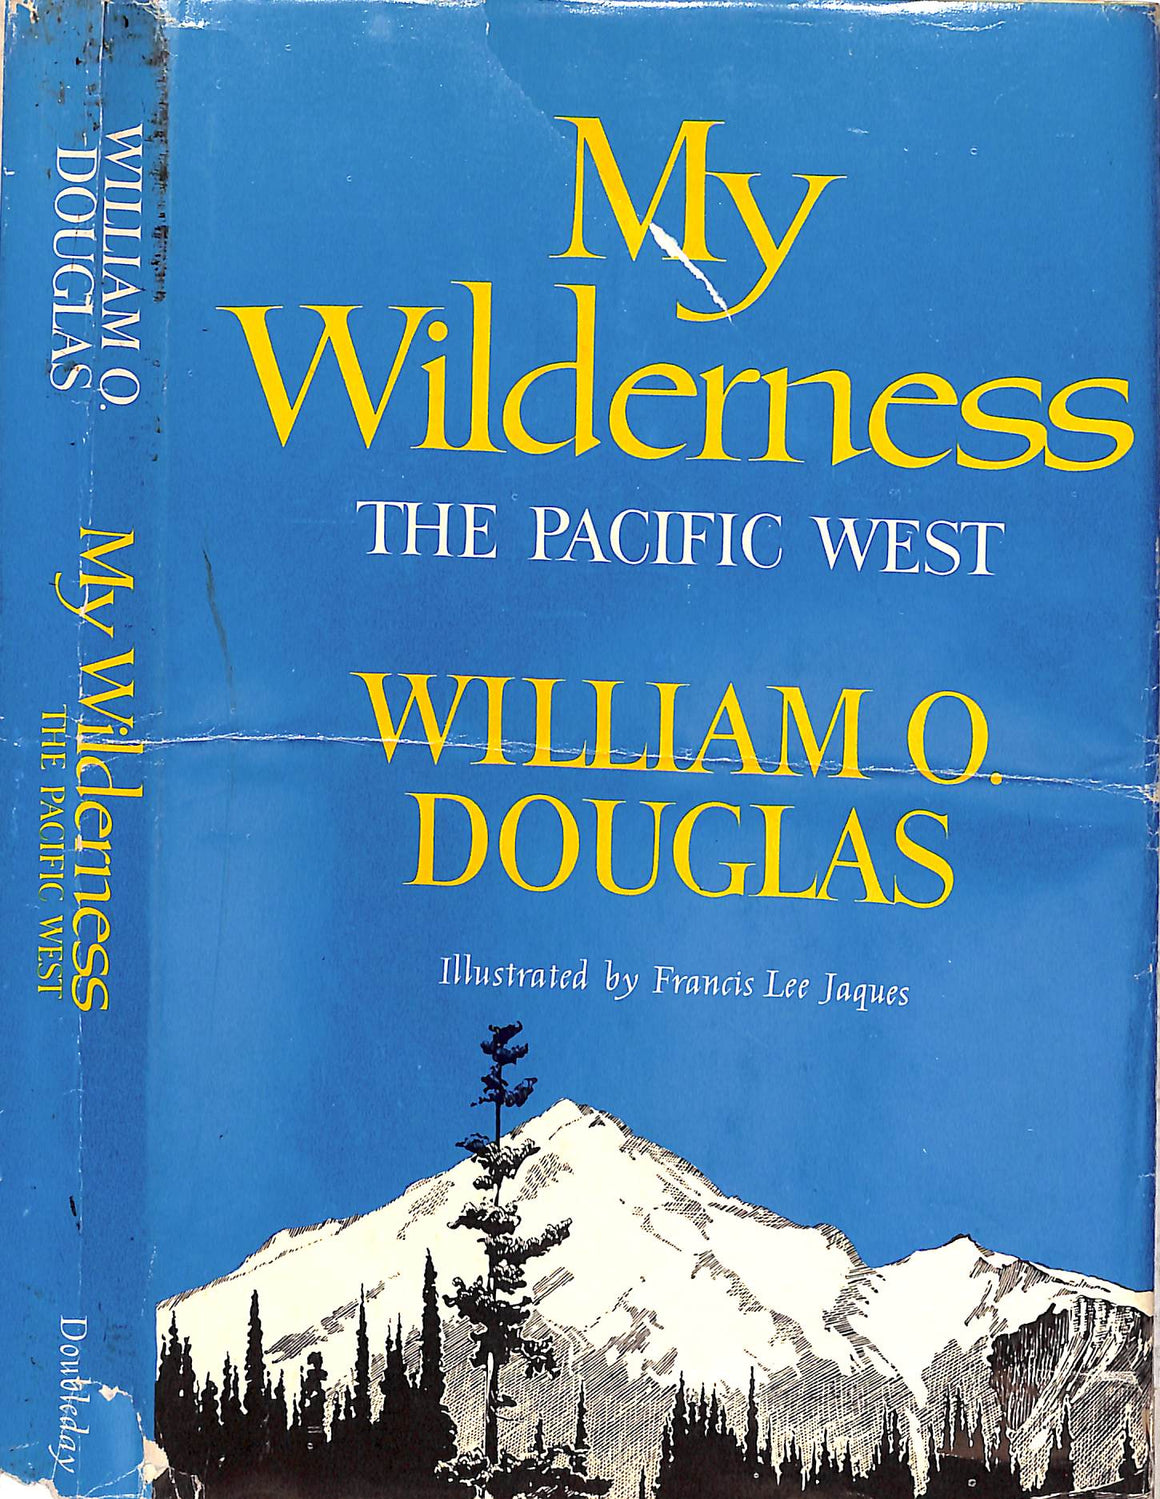 "My Wilderness: The Pacific West" 1960 DOUGLAS, William O.